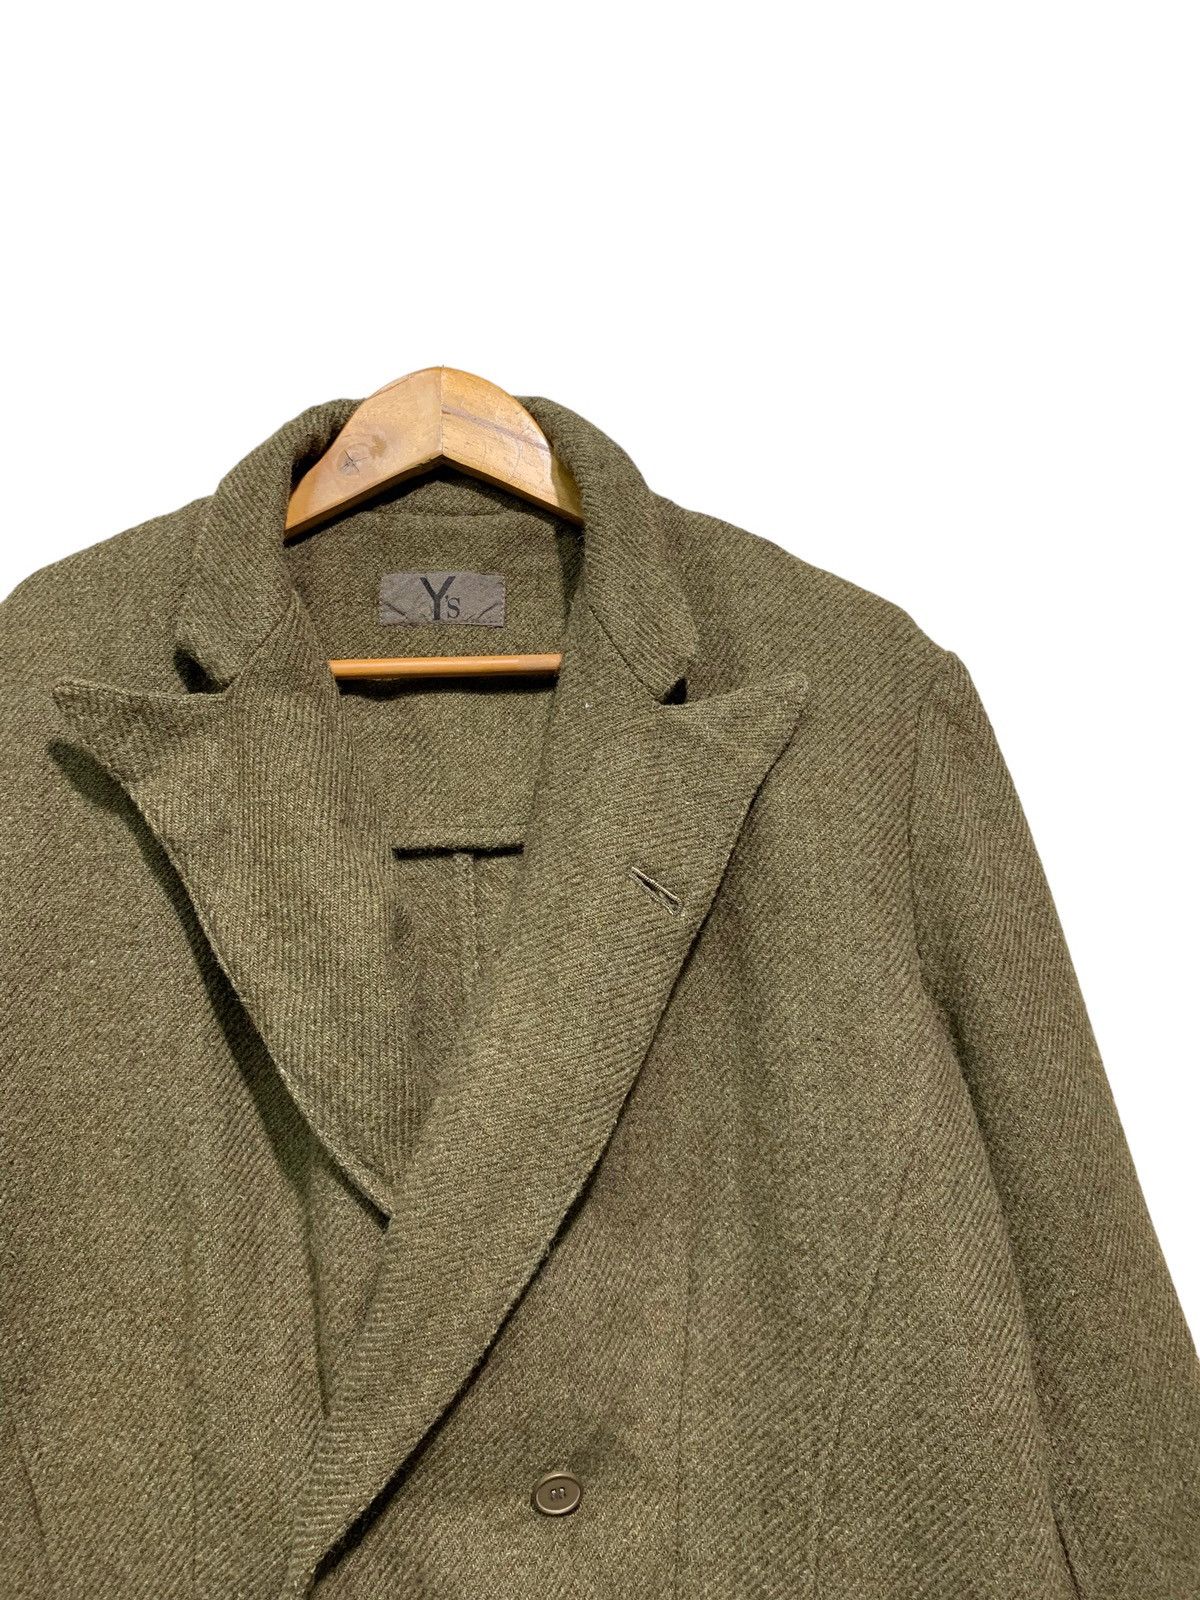 🔥Y’s WOOL DOUBLE BREAT JACKETS OLIVE GREEN - 5